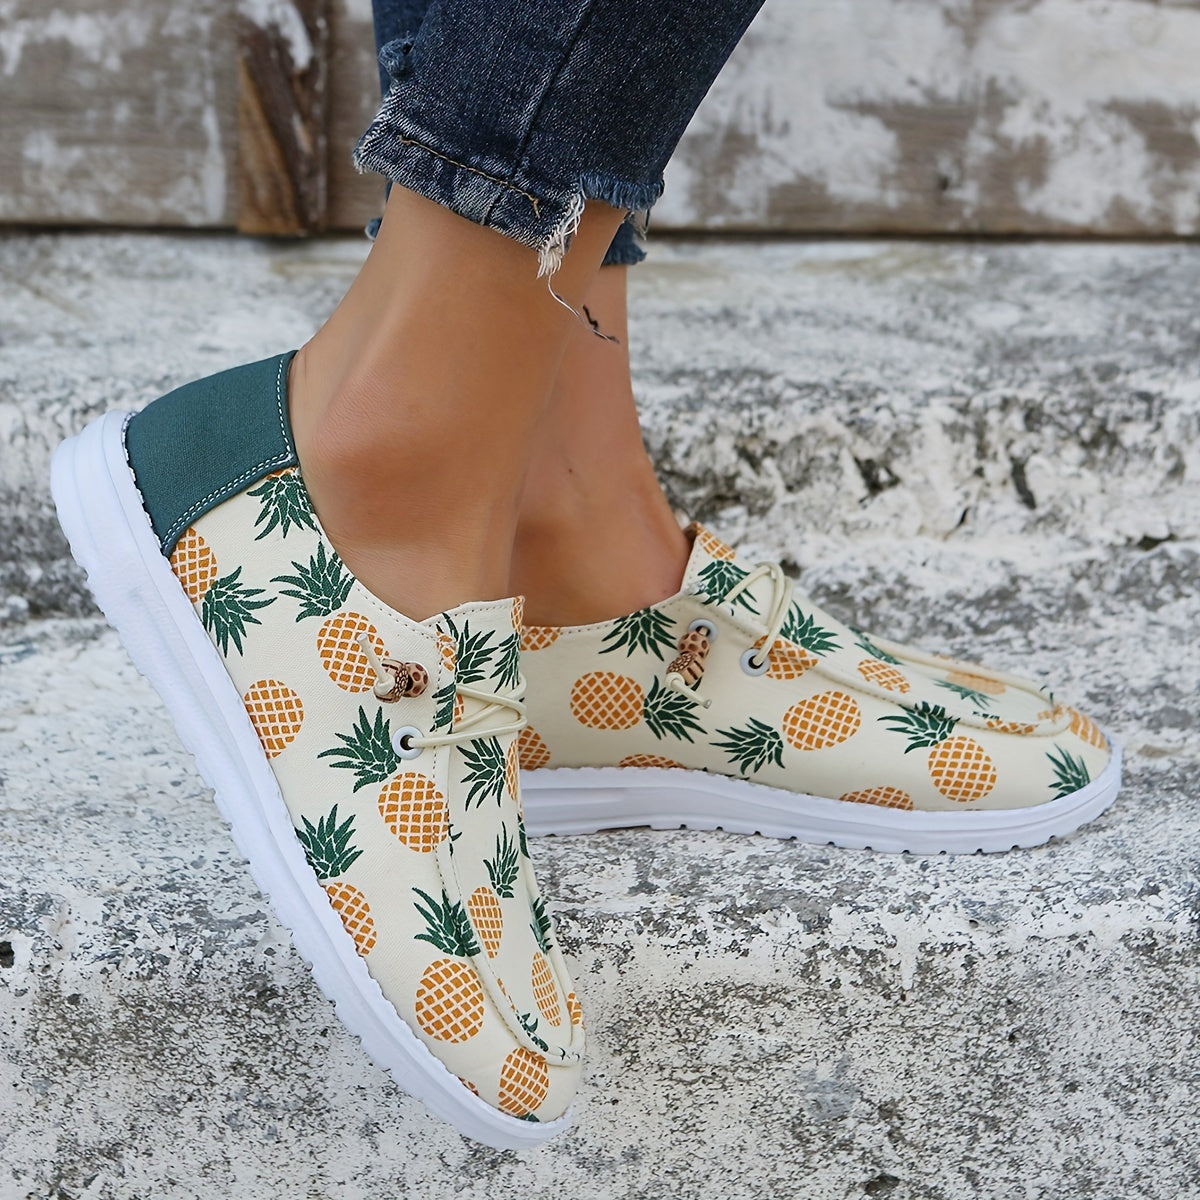 Pineapple Print Canvas Shoes, Comfortable Slip On Low Top Sneakers